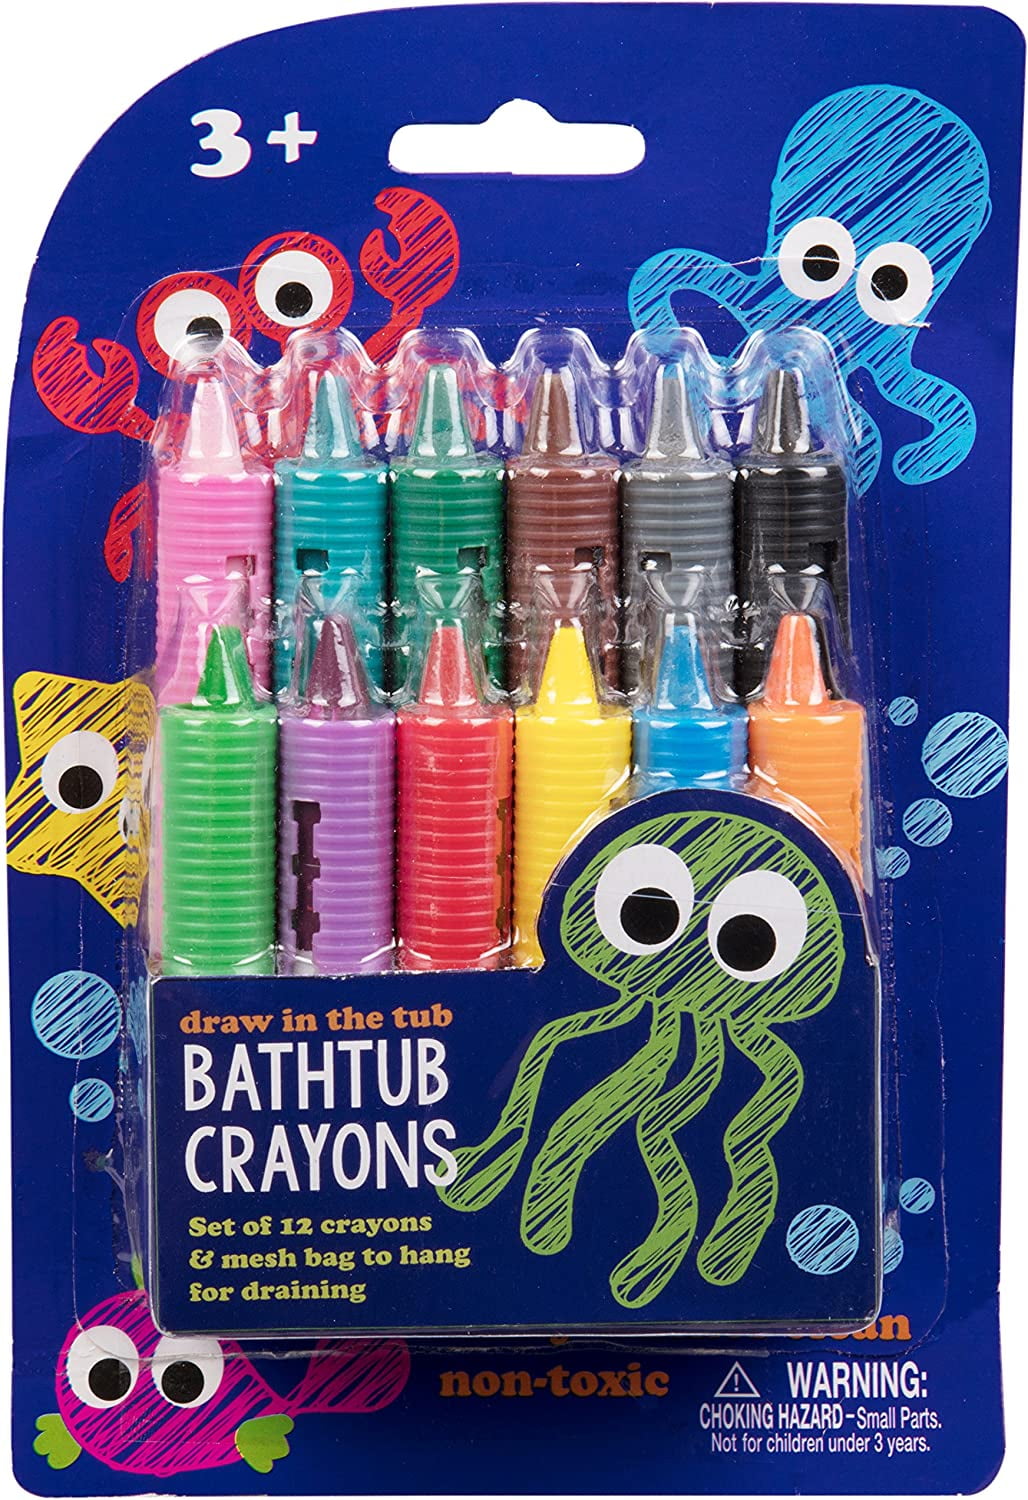 Tub Works Smooth Bath Crayons Bath Toy, 12 Pack | Nontoxic, Washable Bath Crayons for Toddlers & Kids | Unique Formula Draws Smoothly & Vividly on